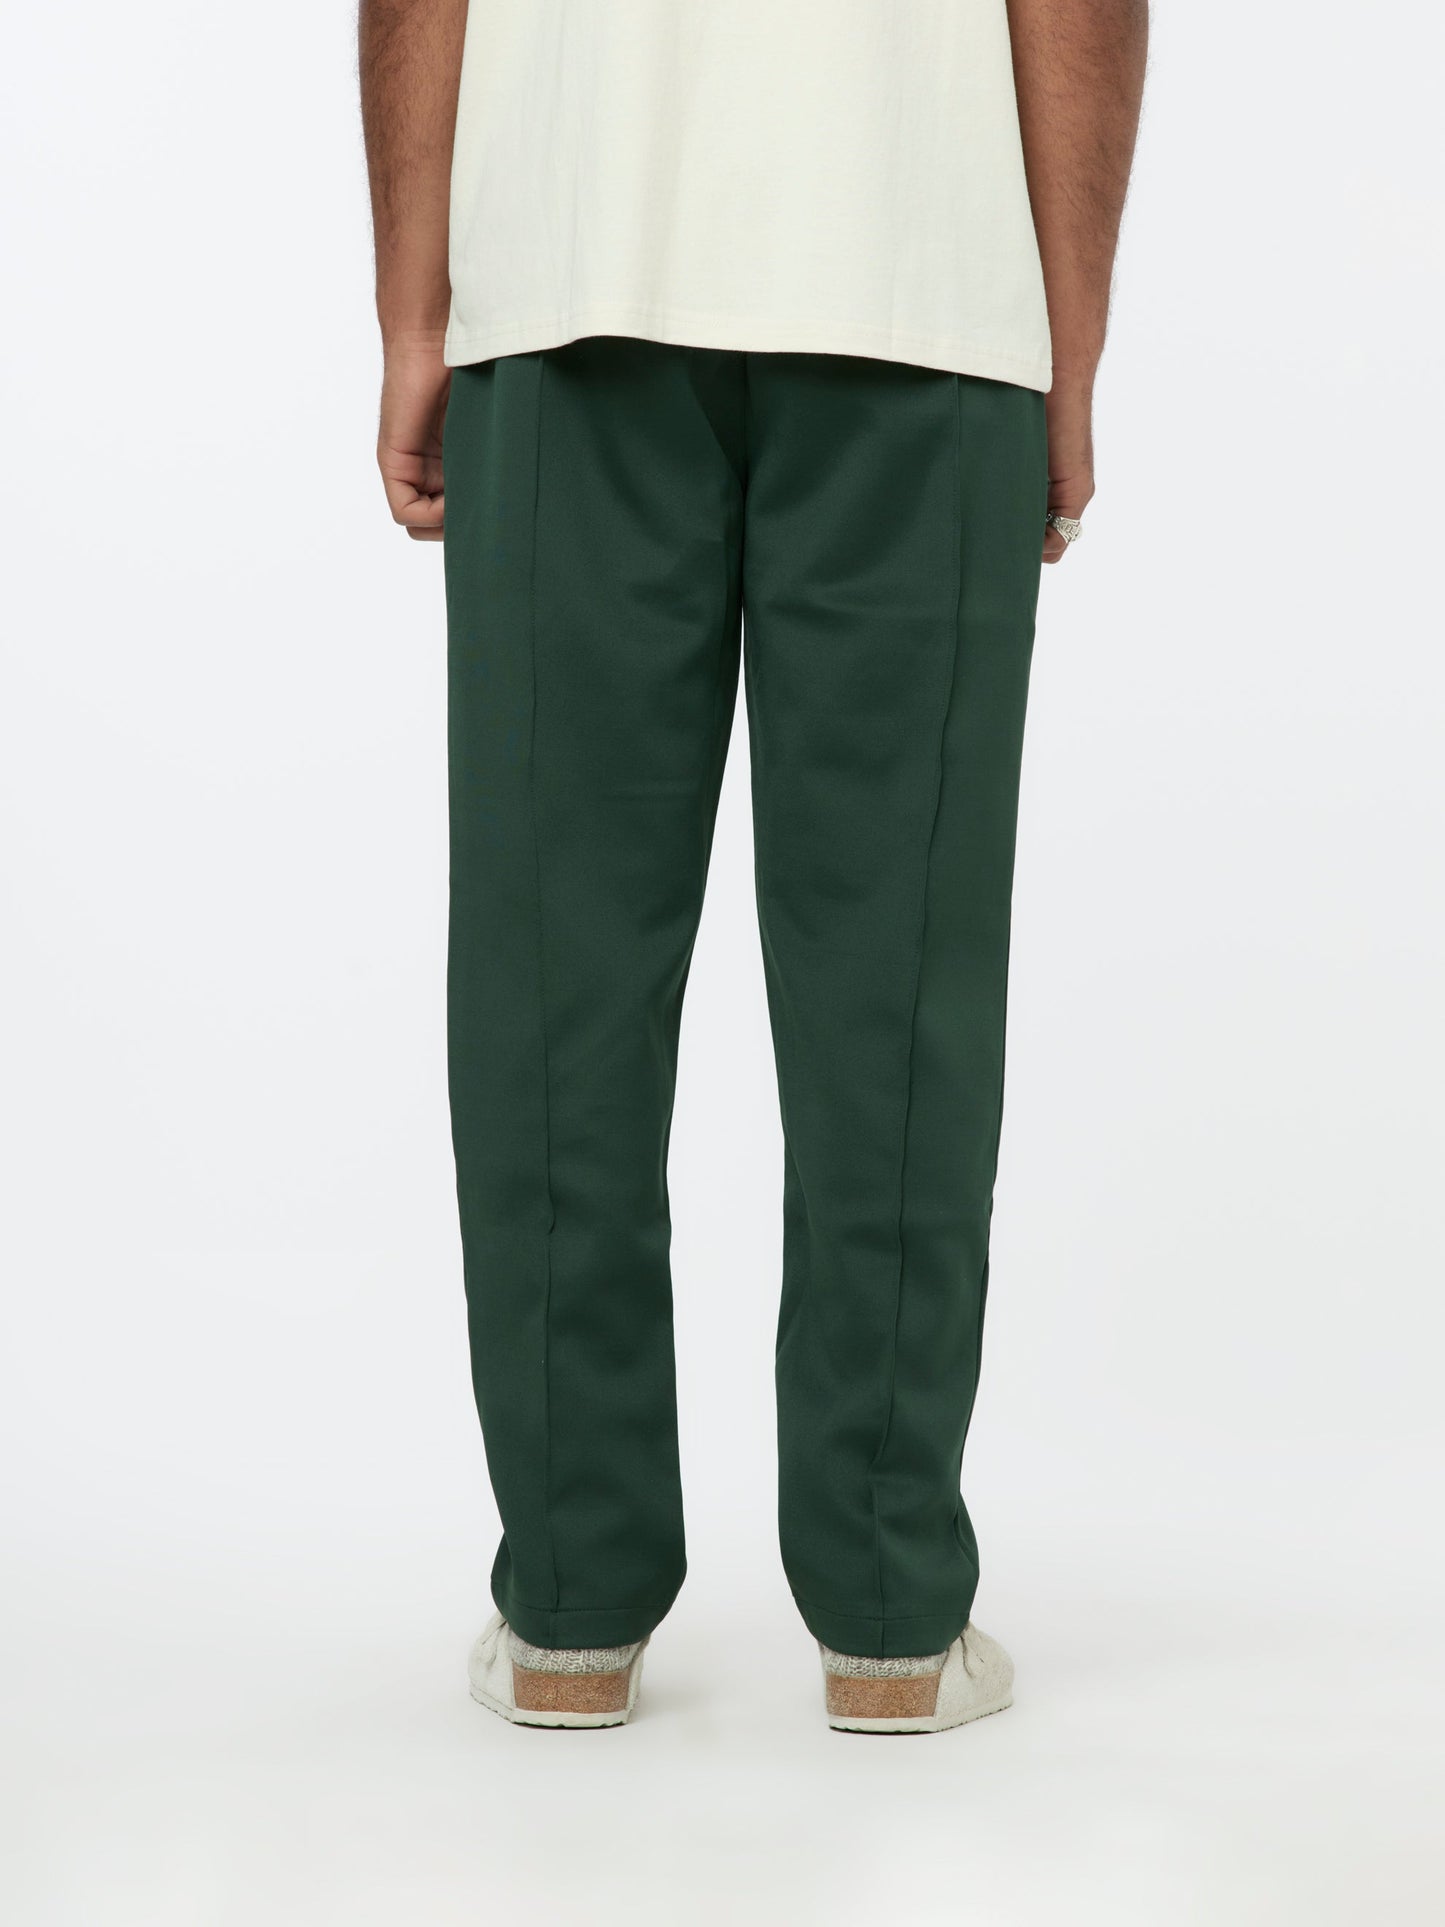 Warm Up Track Pants (Forest)